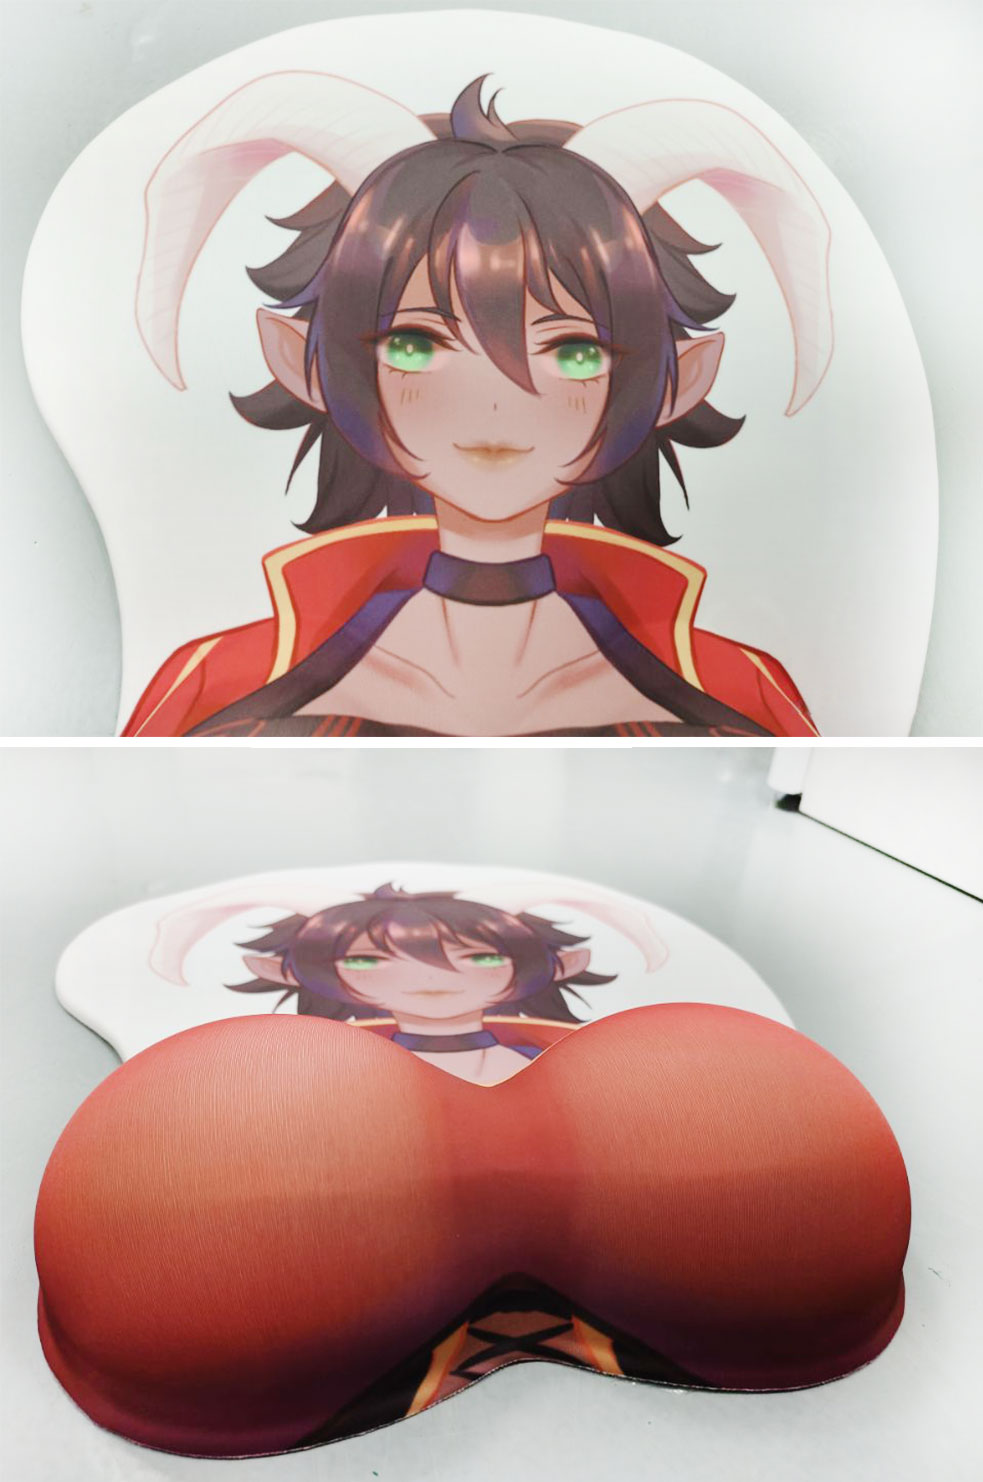 fischl life size oppai mousepad 6635 - Anime Mousepads